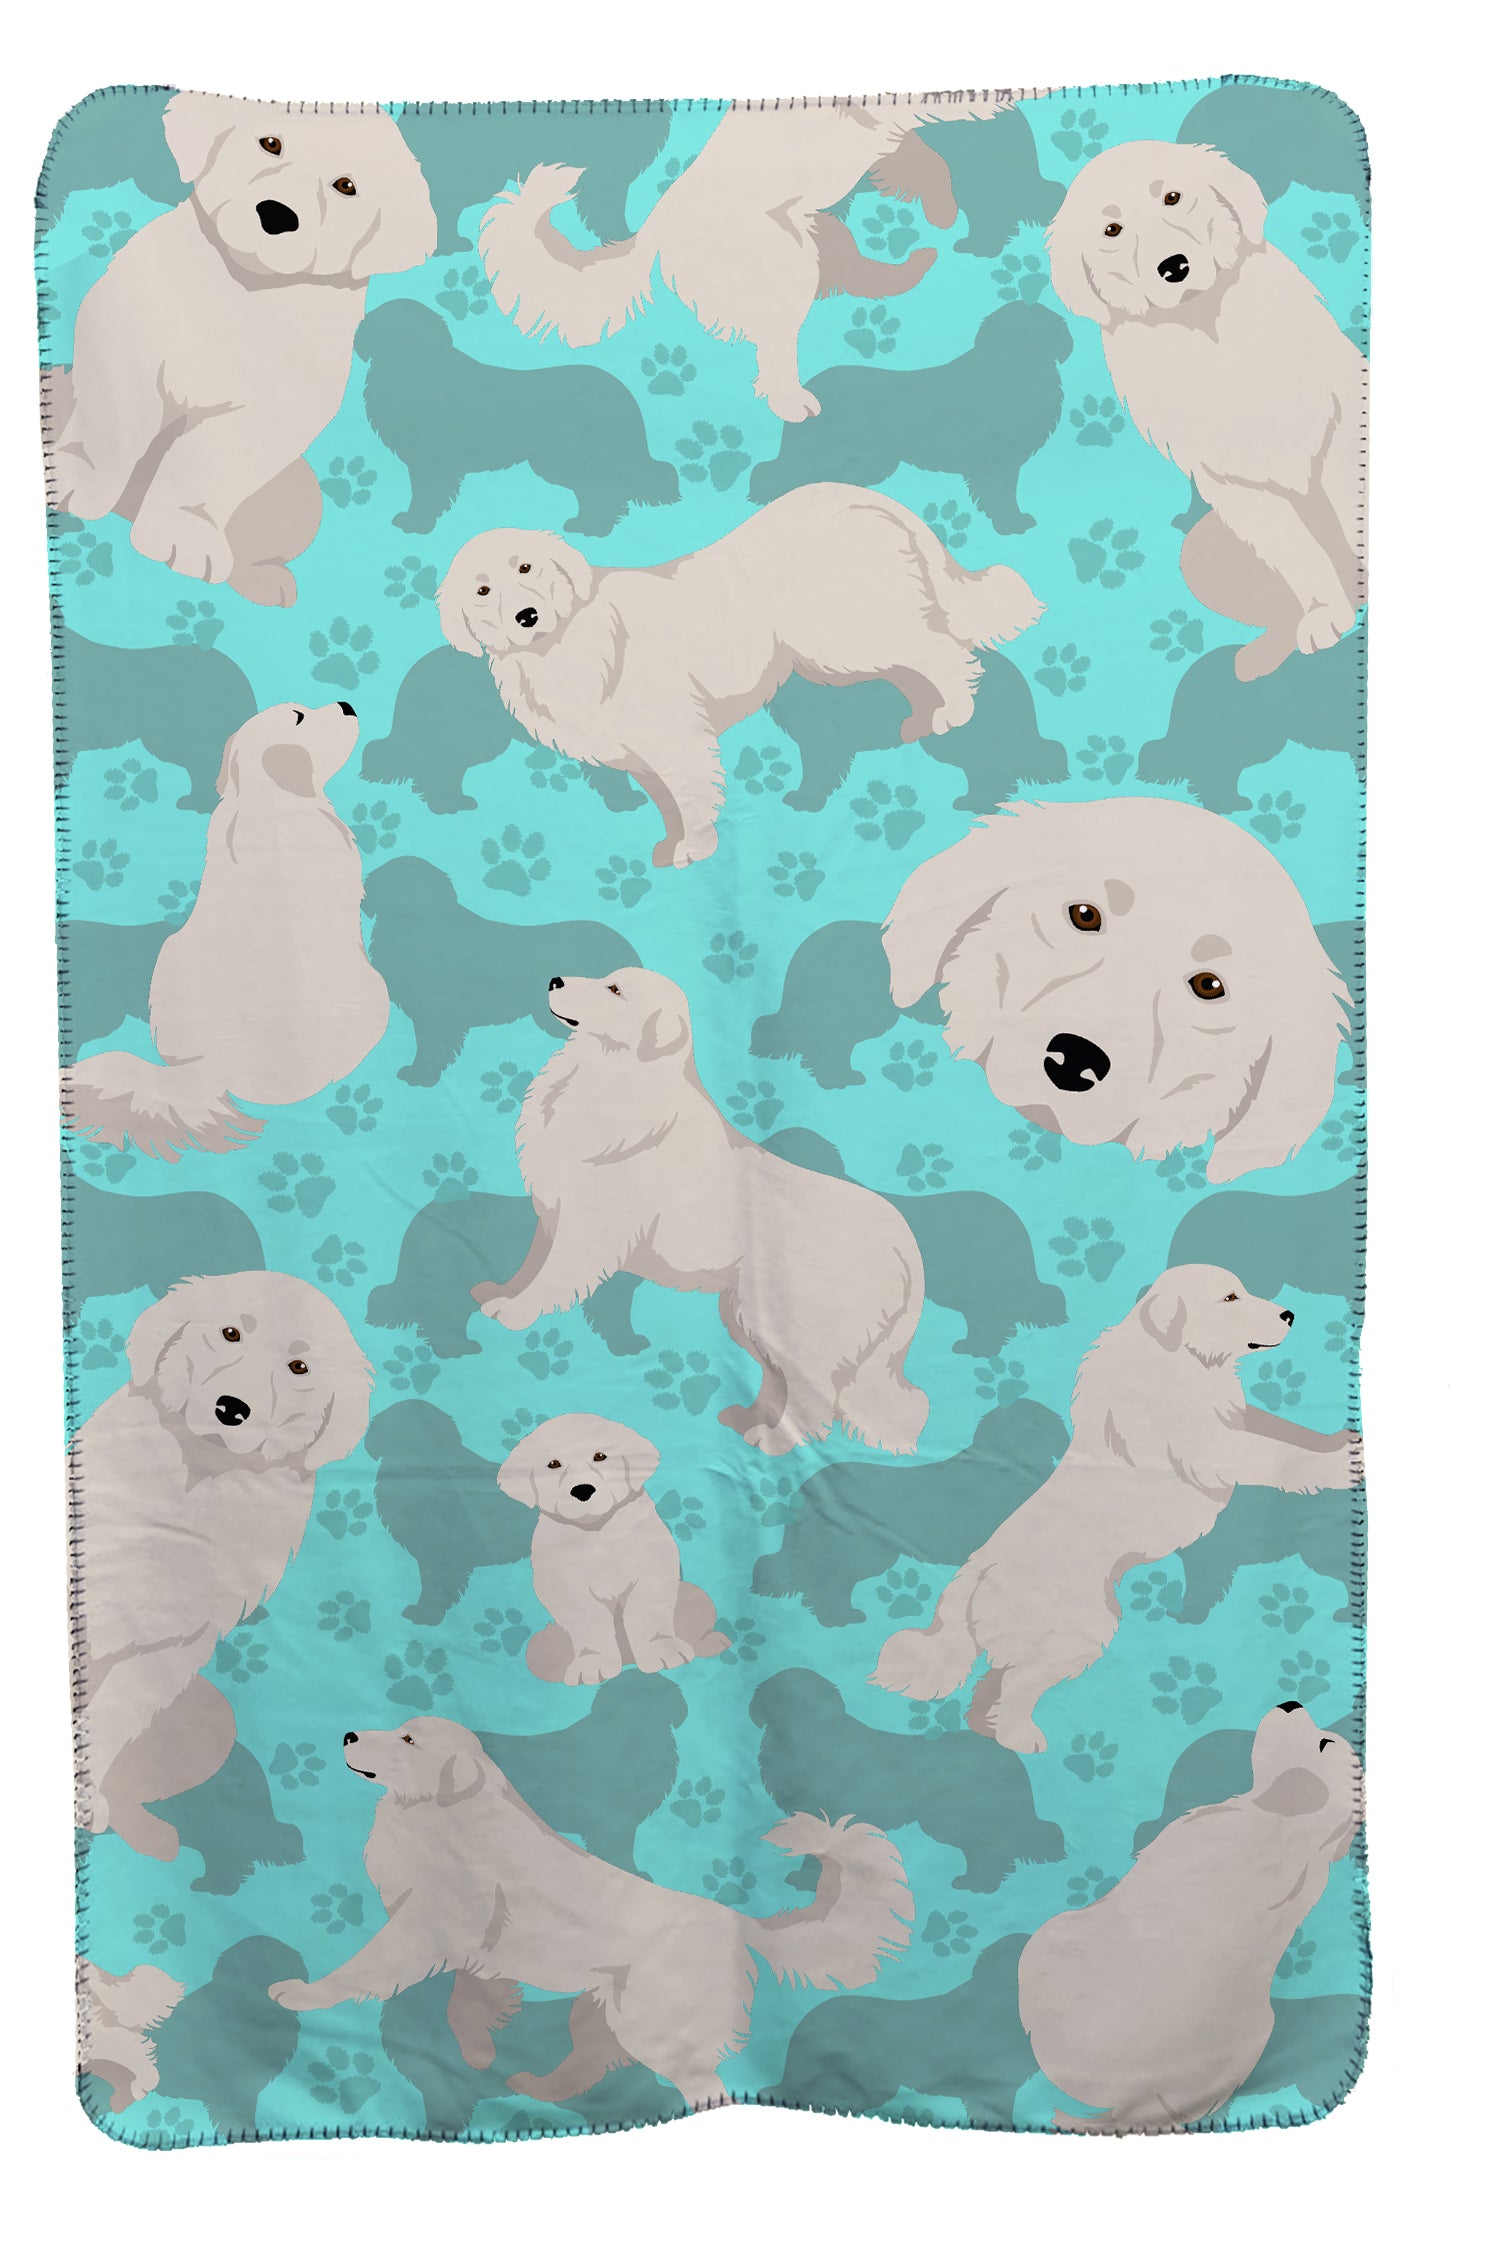 Buy this Great Pyrenees Soft Travel Blanket with Bag